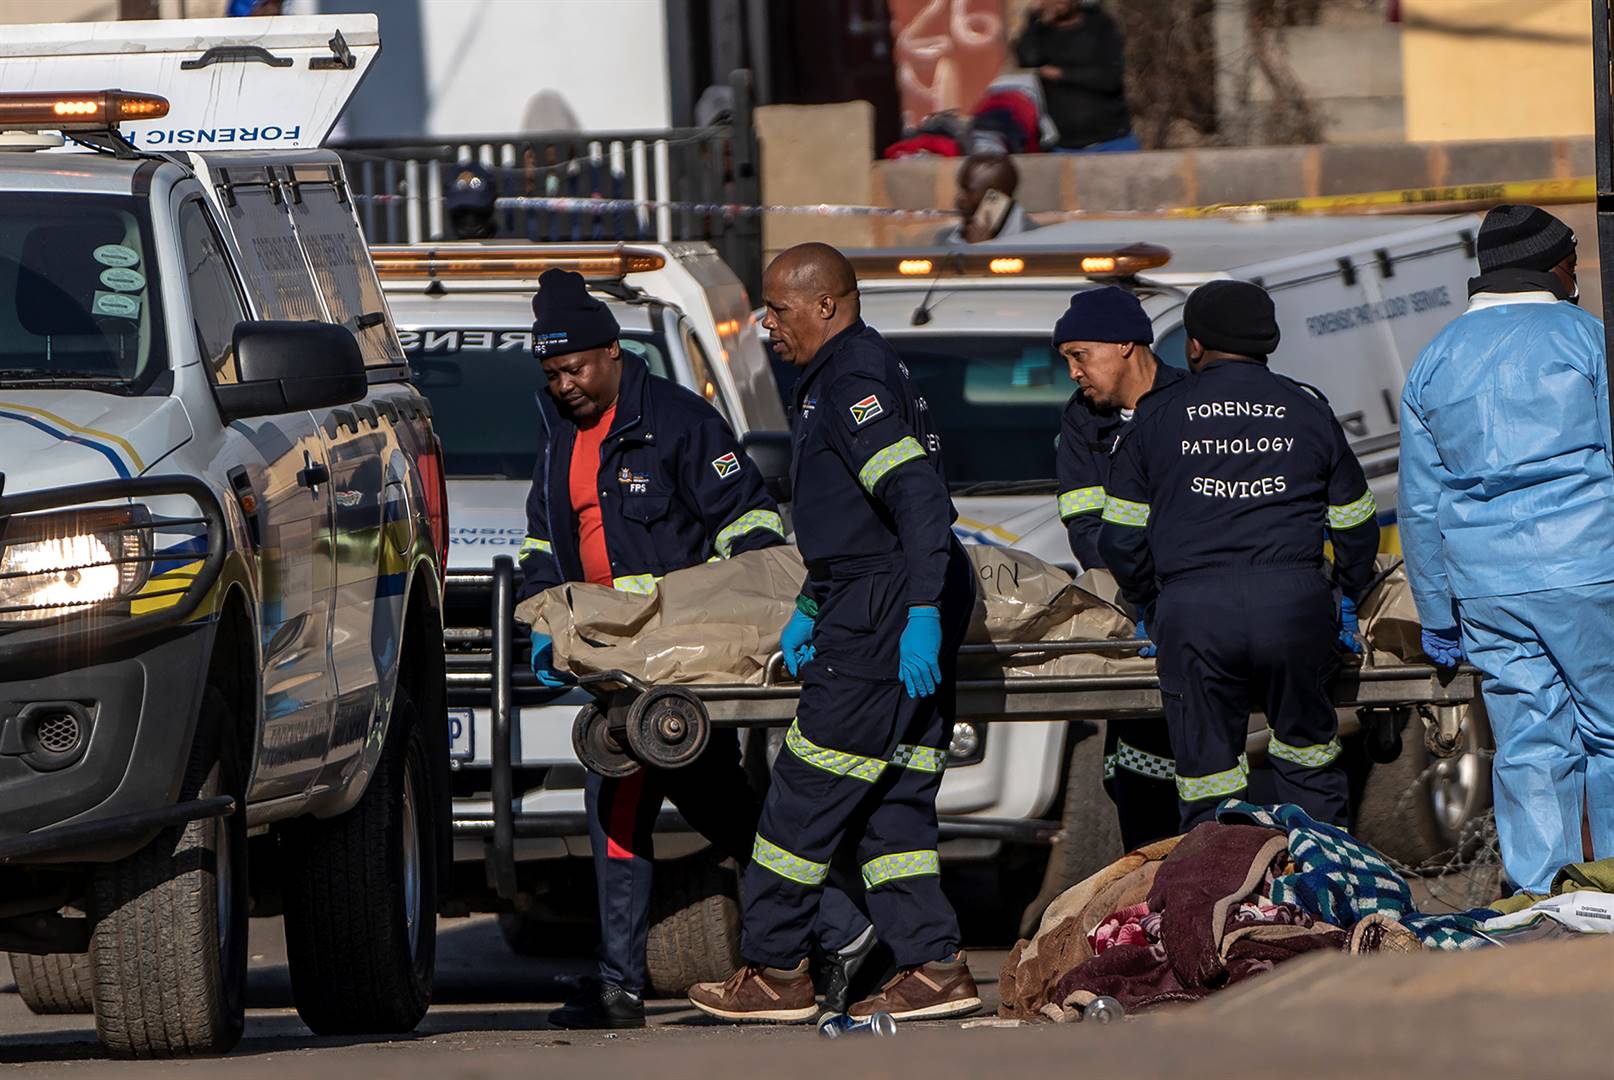 A body is removed from the scene of an overnight tavern shooting in Soweto on July 10. Photo: Shiraaz Mohamed/AP